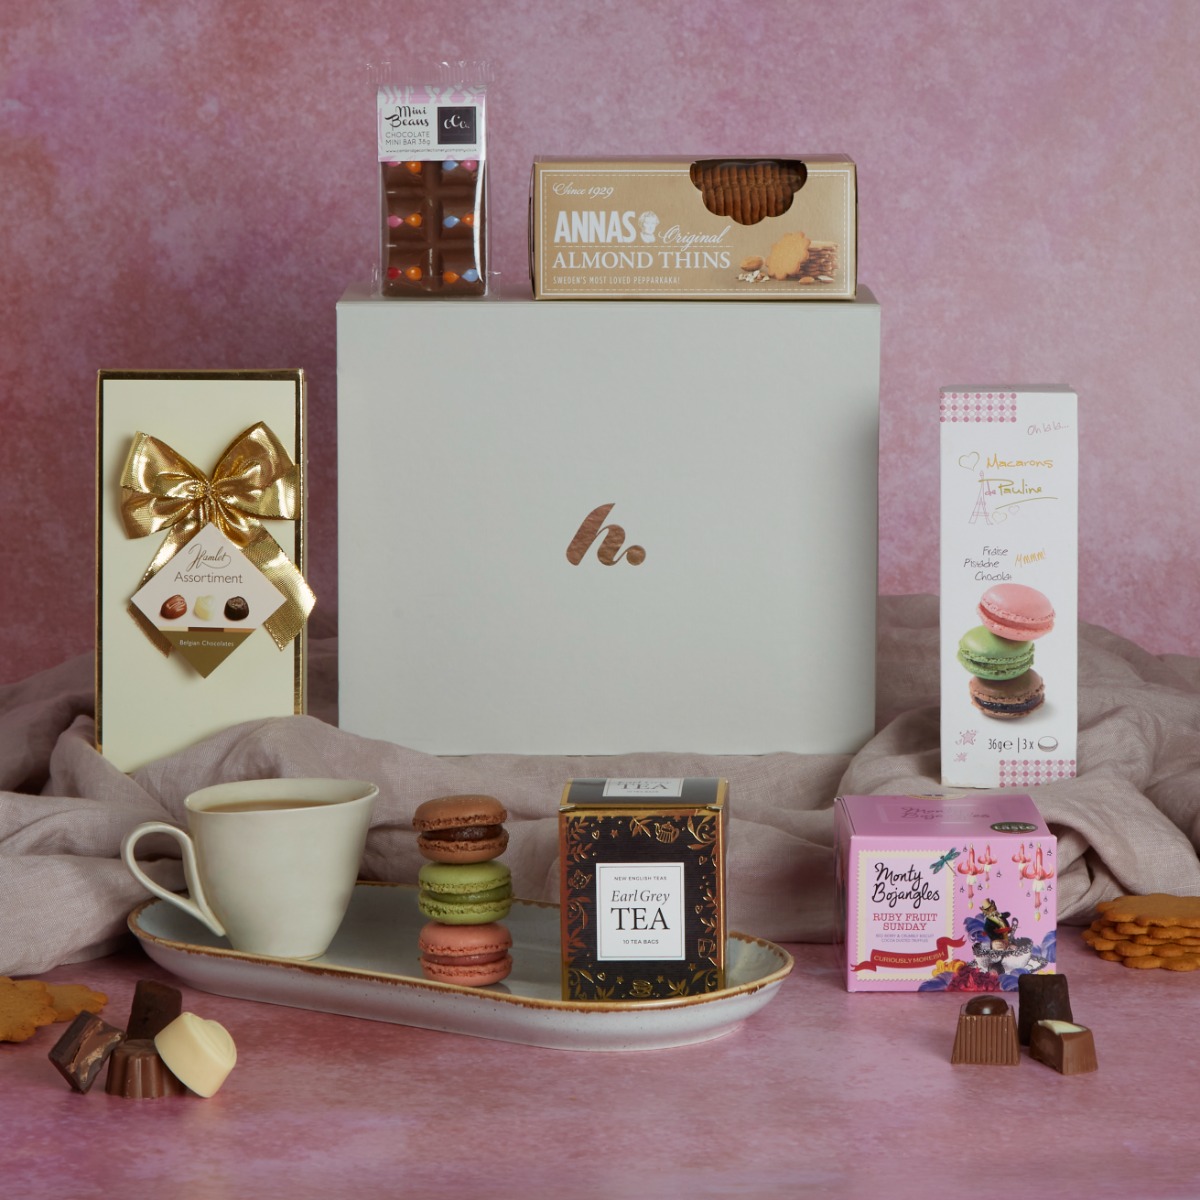 Sweet Treats for Her Gift Box with contents on display as a recommended gift for Mother's Day